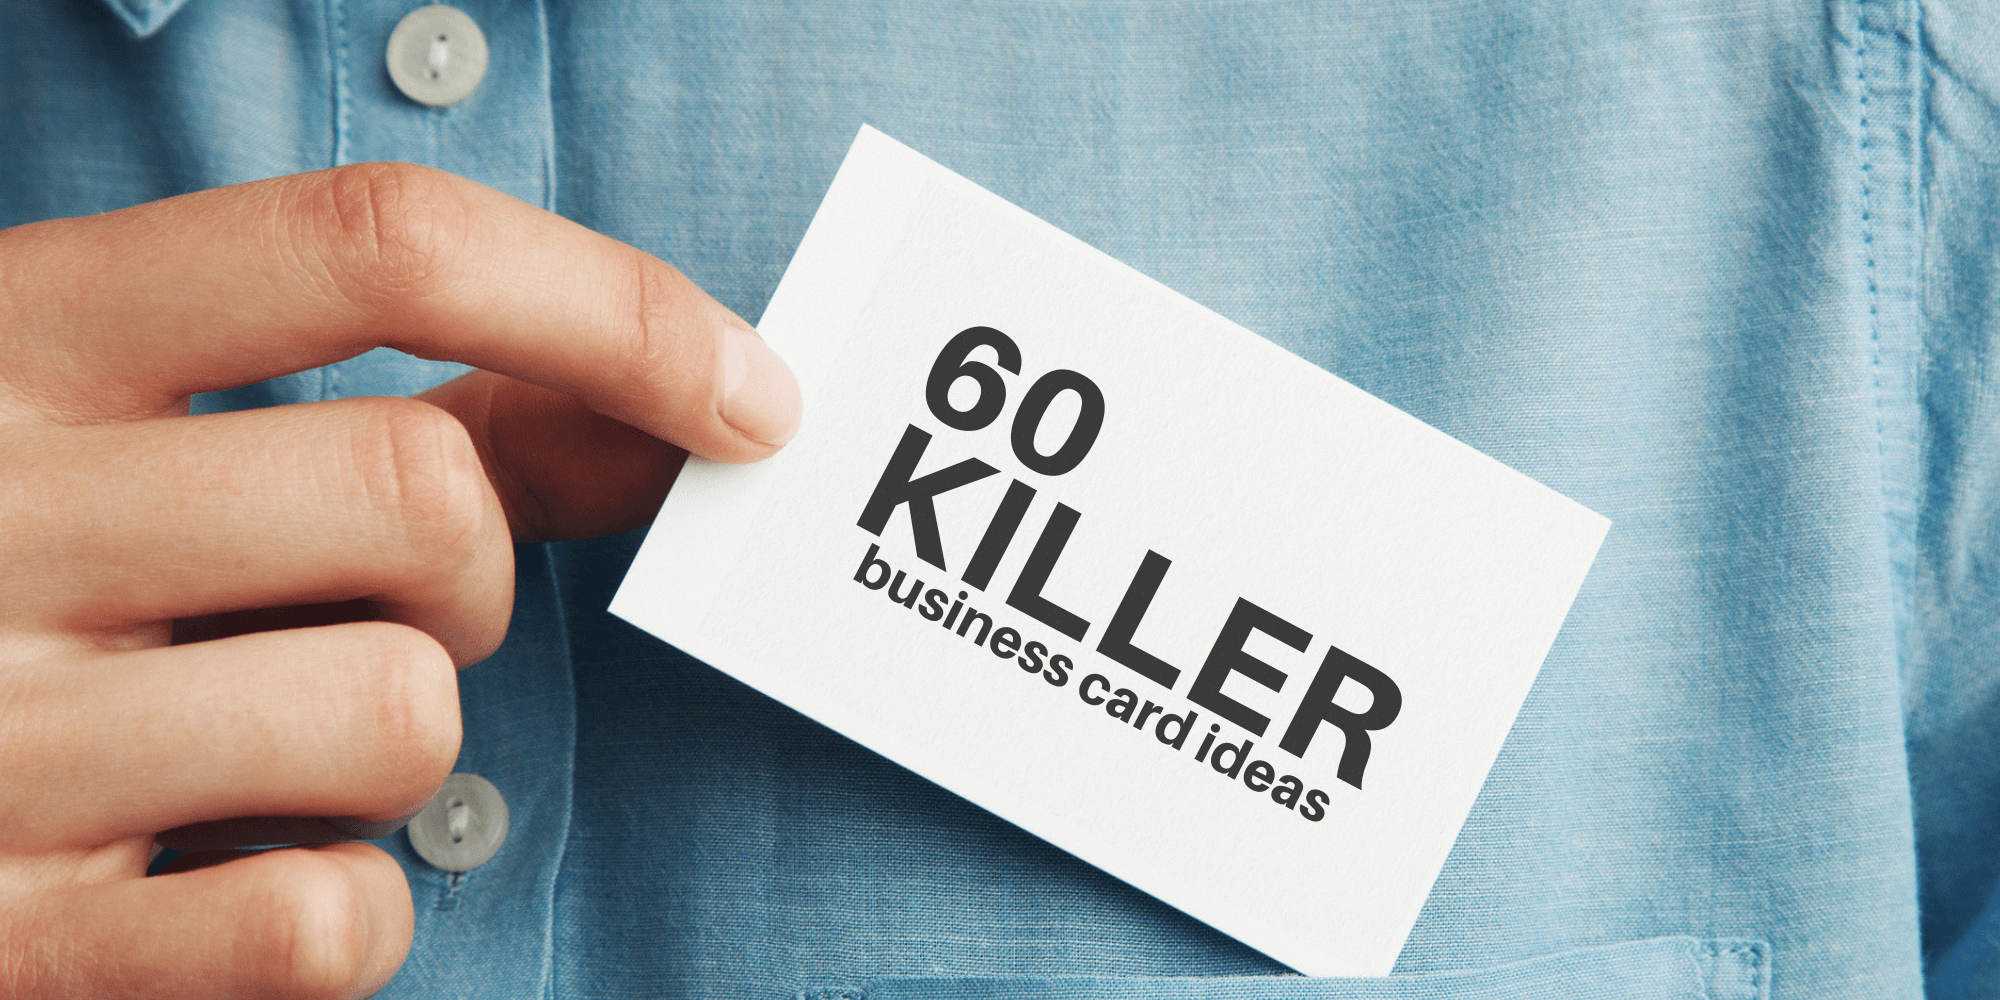 60 Modern Business Cards To Make A Killer First Impression With Freelance Business Card Template